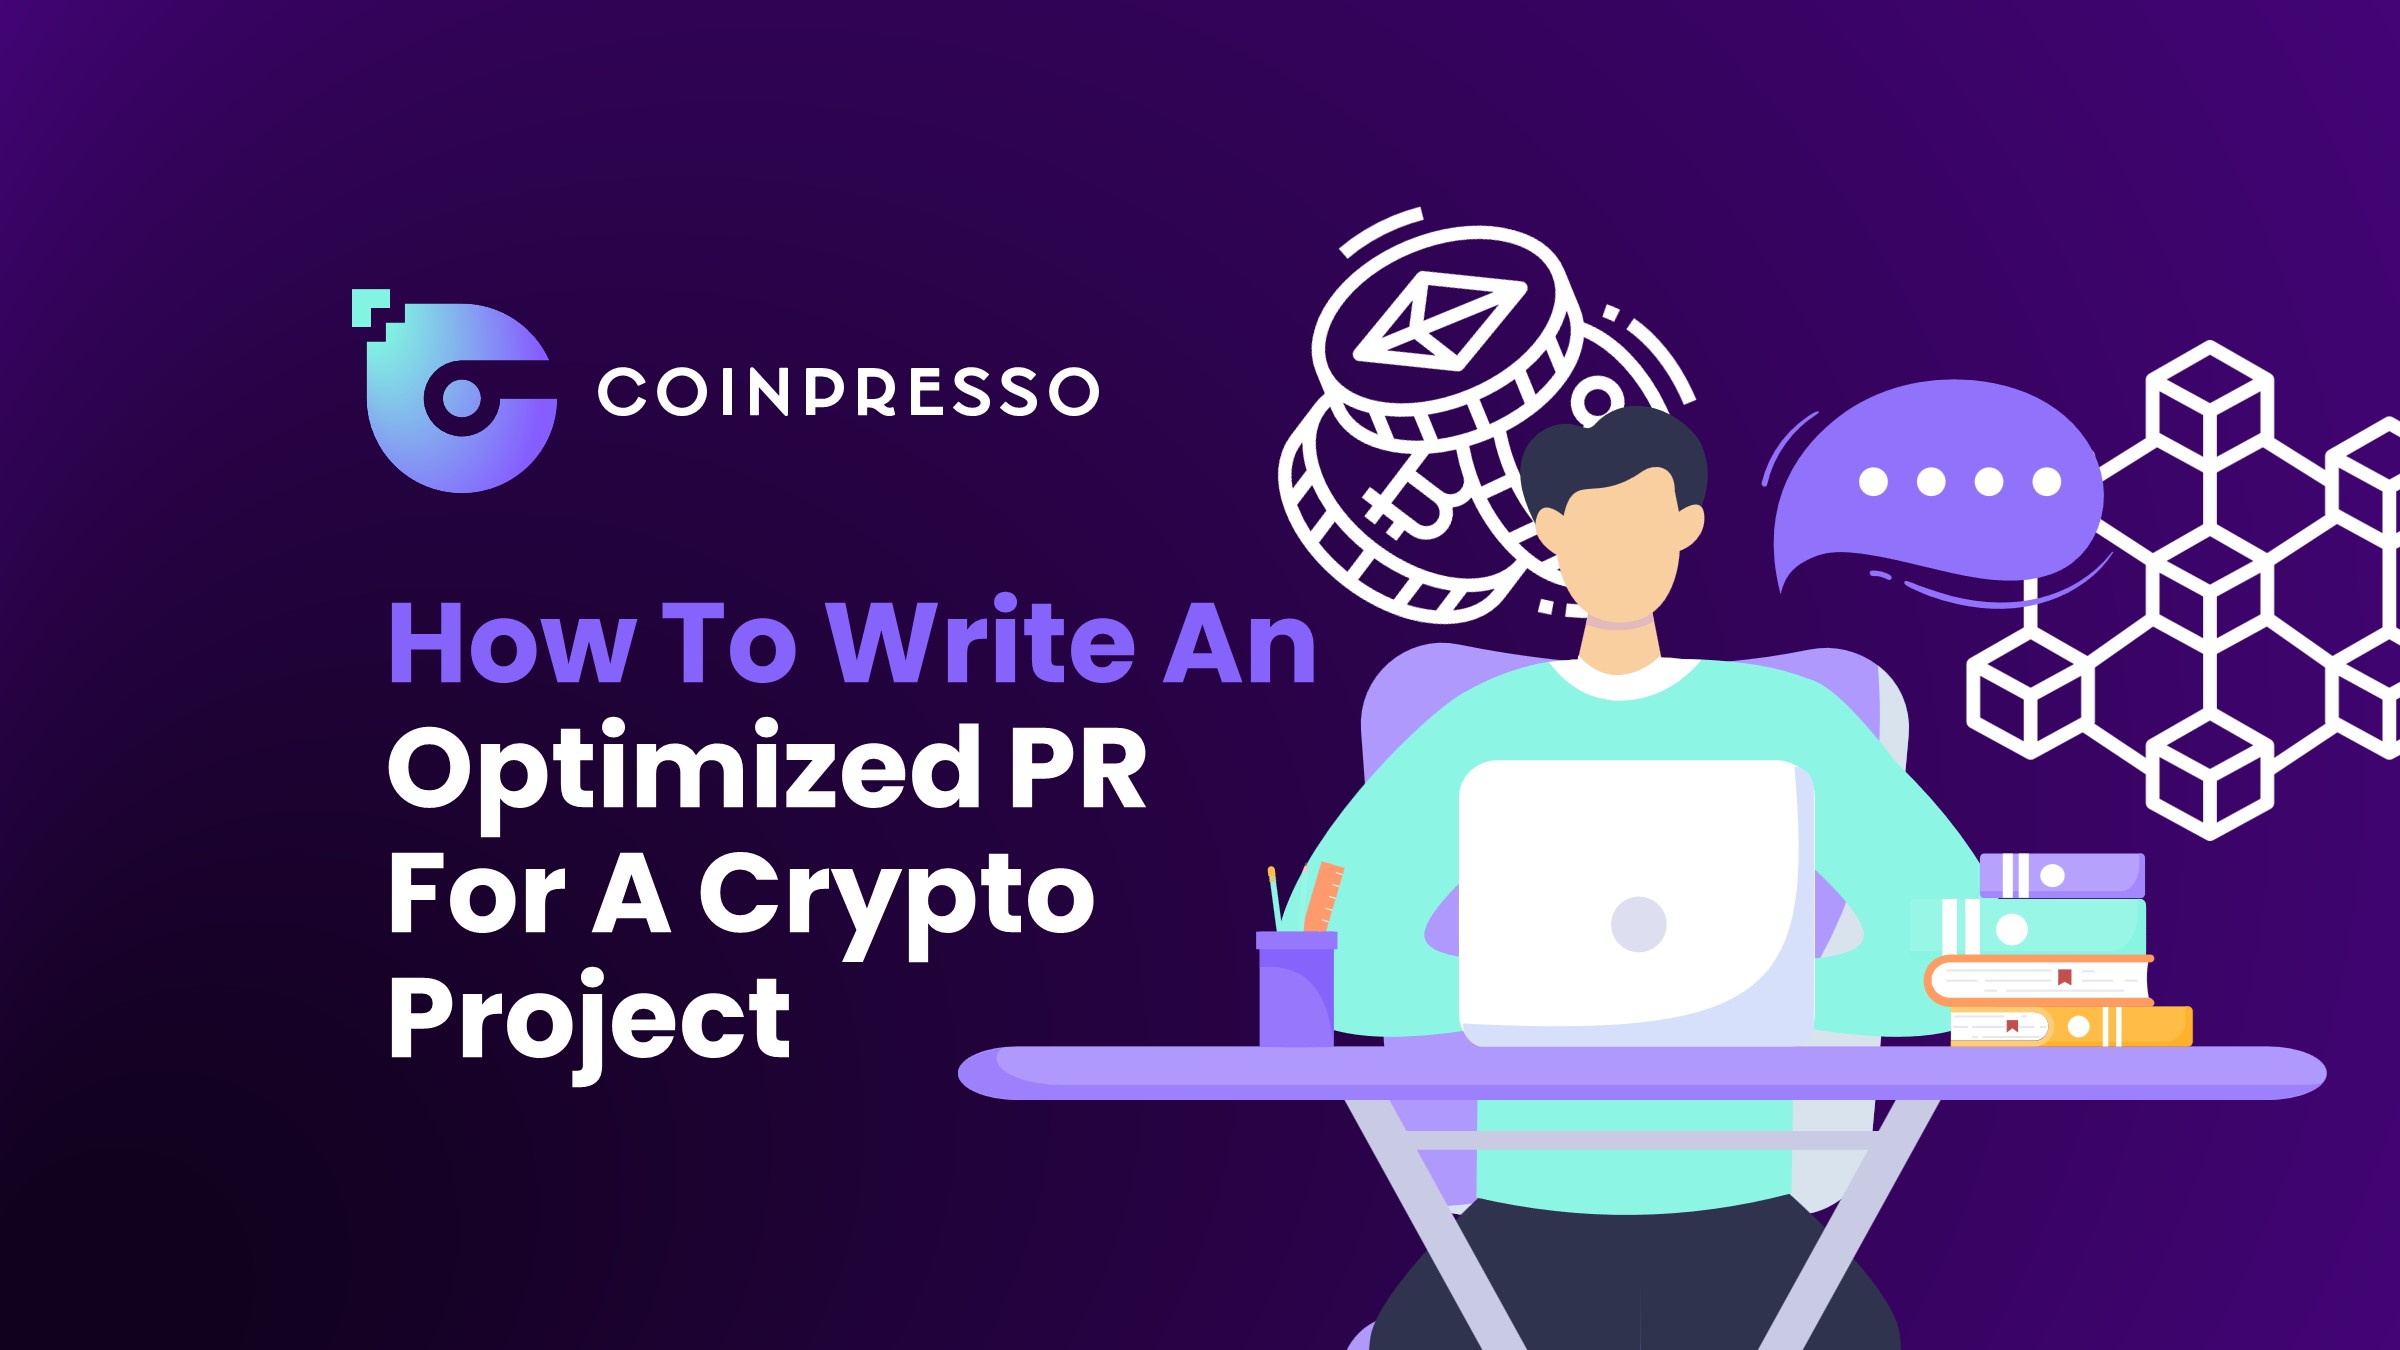 How To Write An Optimized PR For A Crypto Project